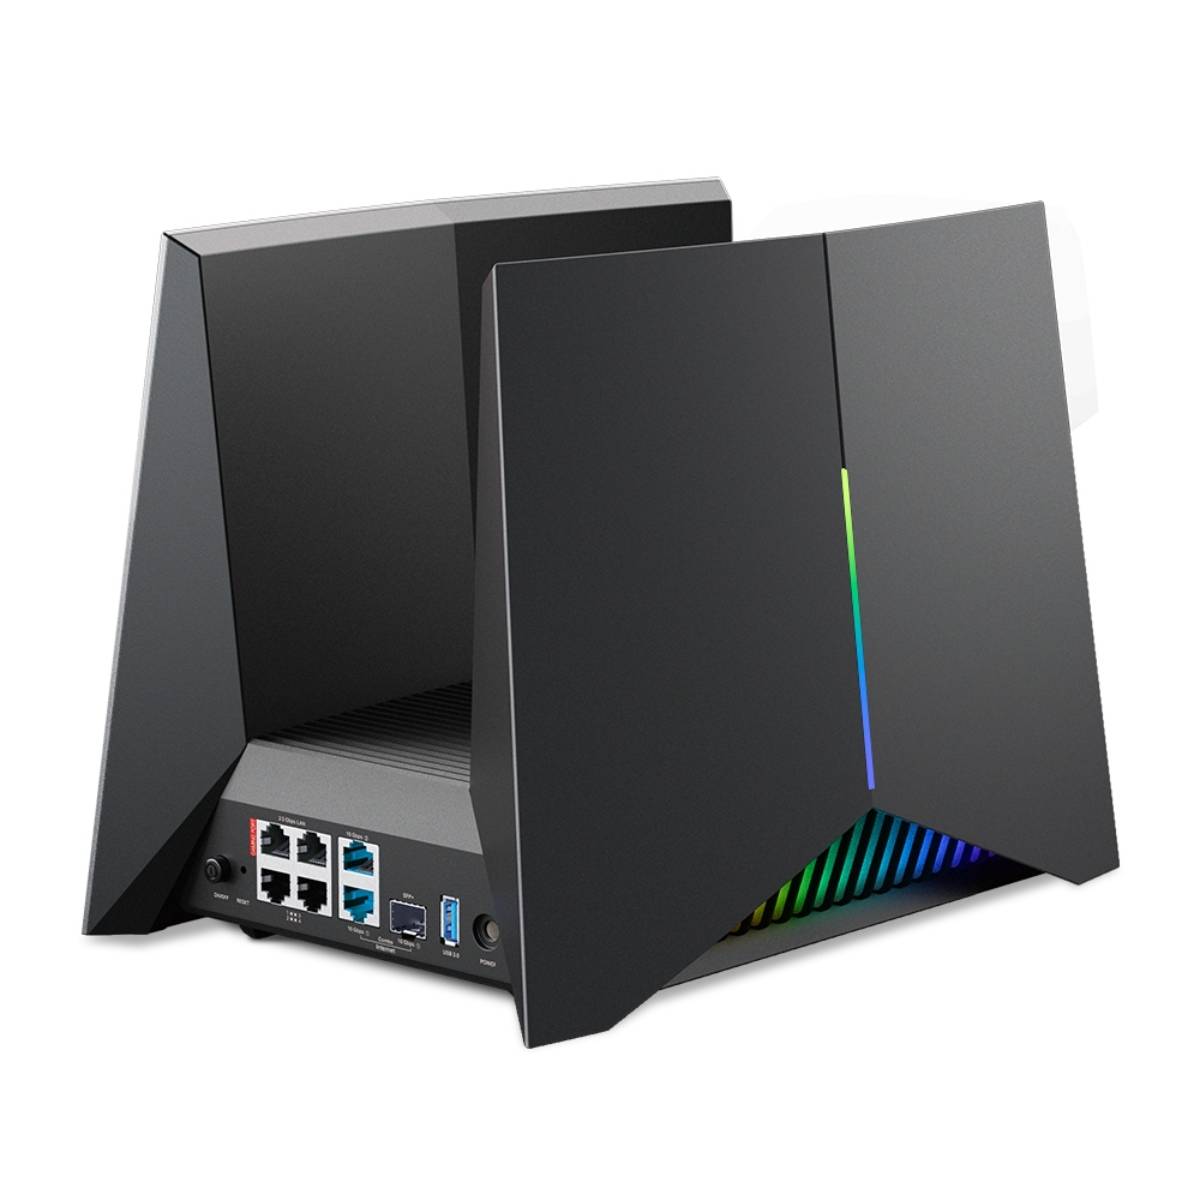 TP-Link Archer GE800 - BE19000 Tri-Band WiFi 7 Gaming Router, , large image number 2